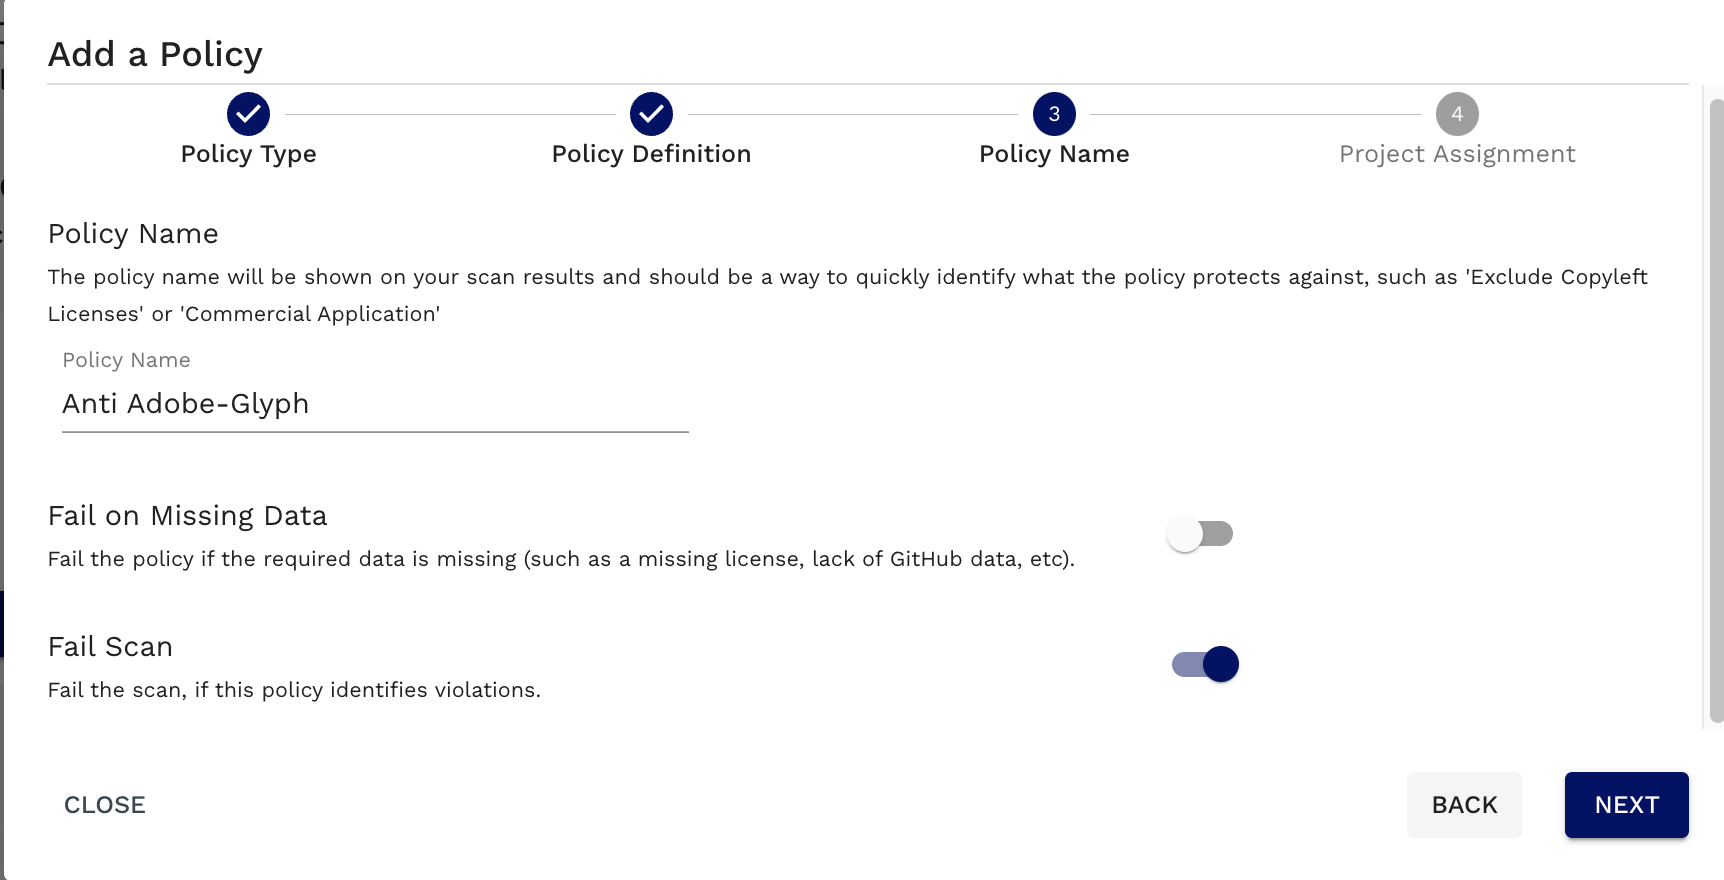 Policy name and behavior inputs